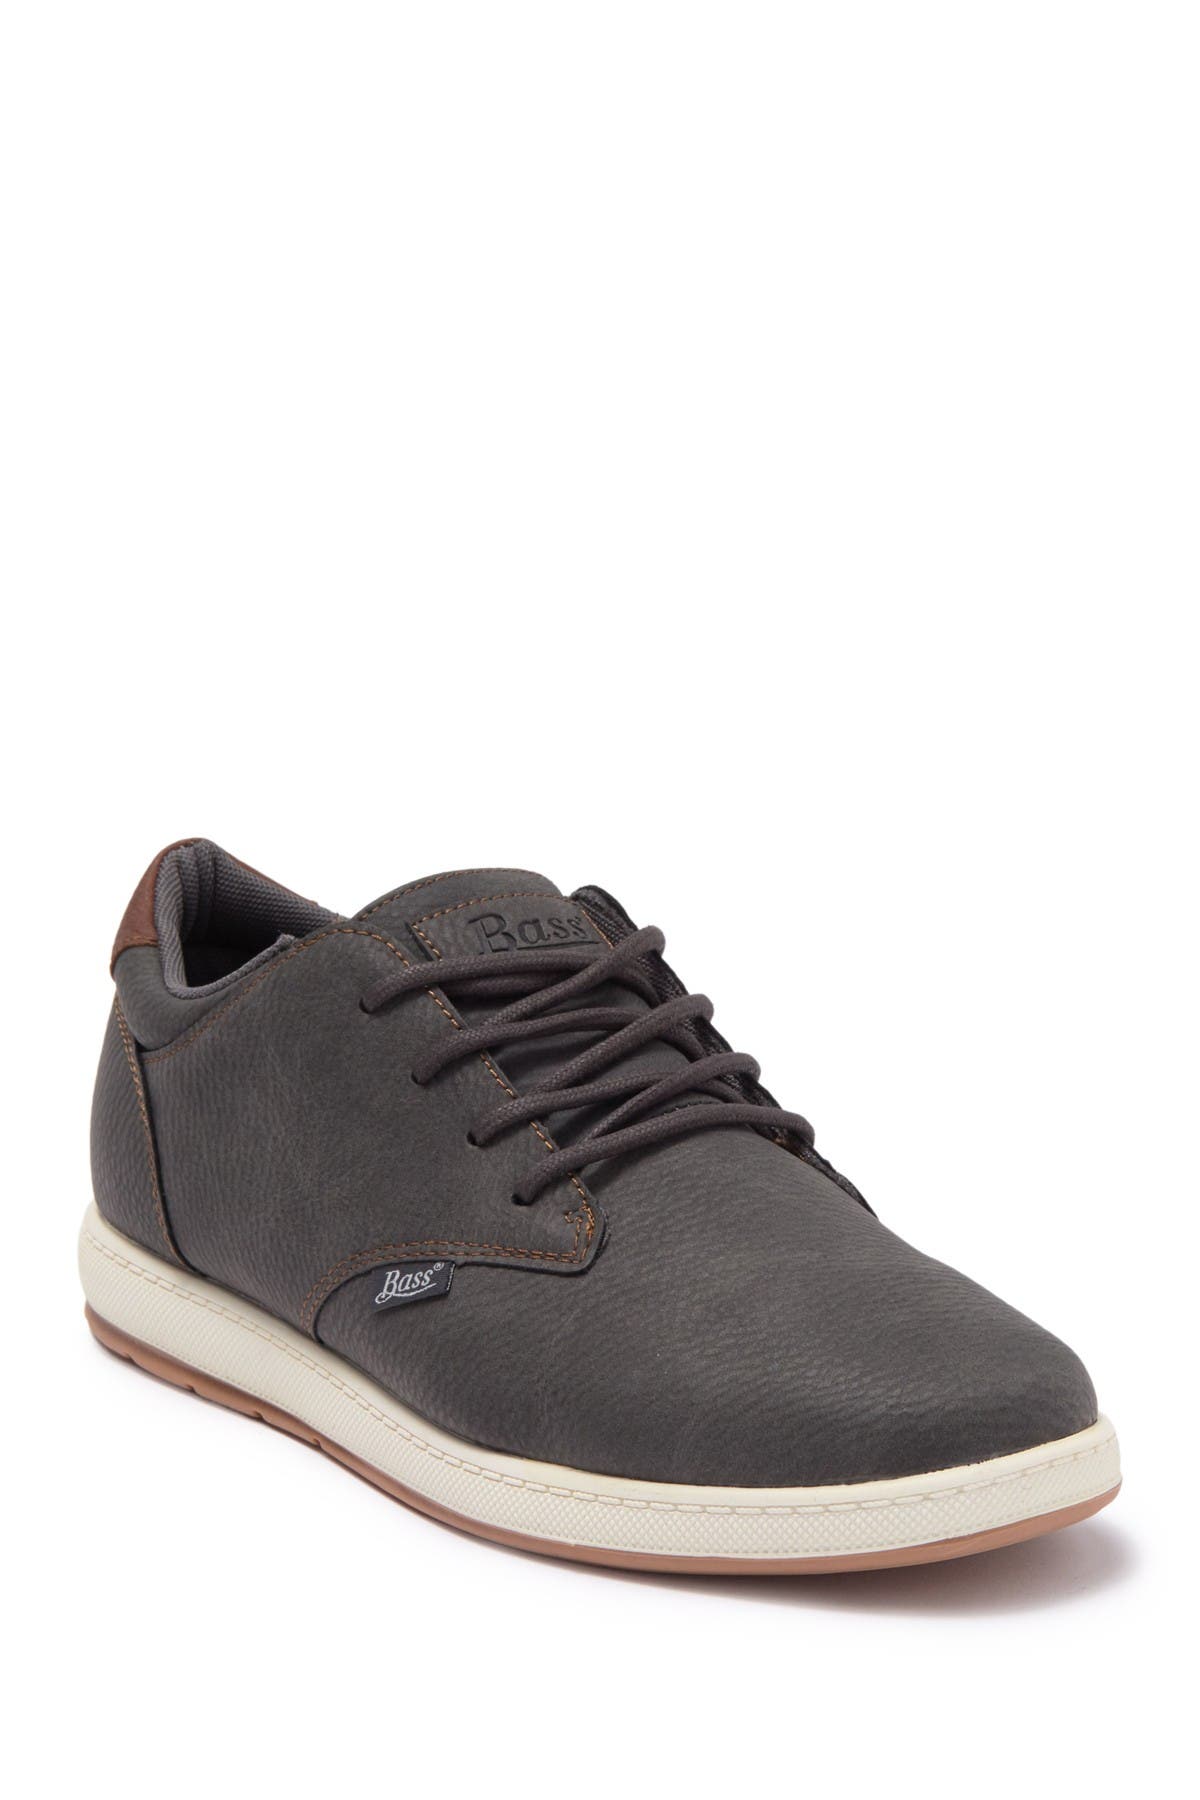 G.h. Bass & Co Percy Sneaker In Charcoal/tan